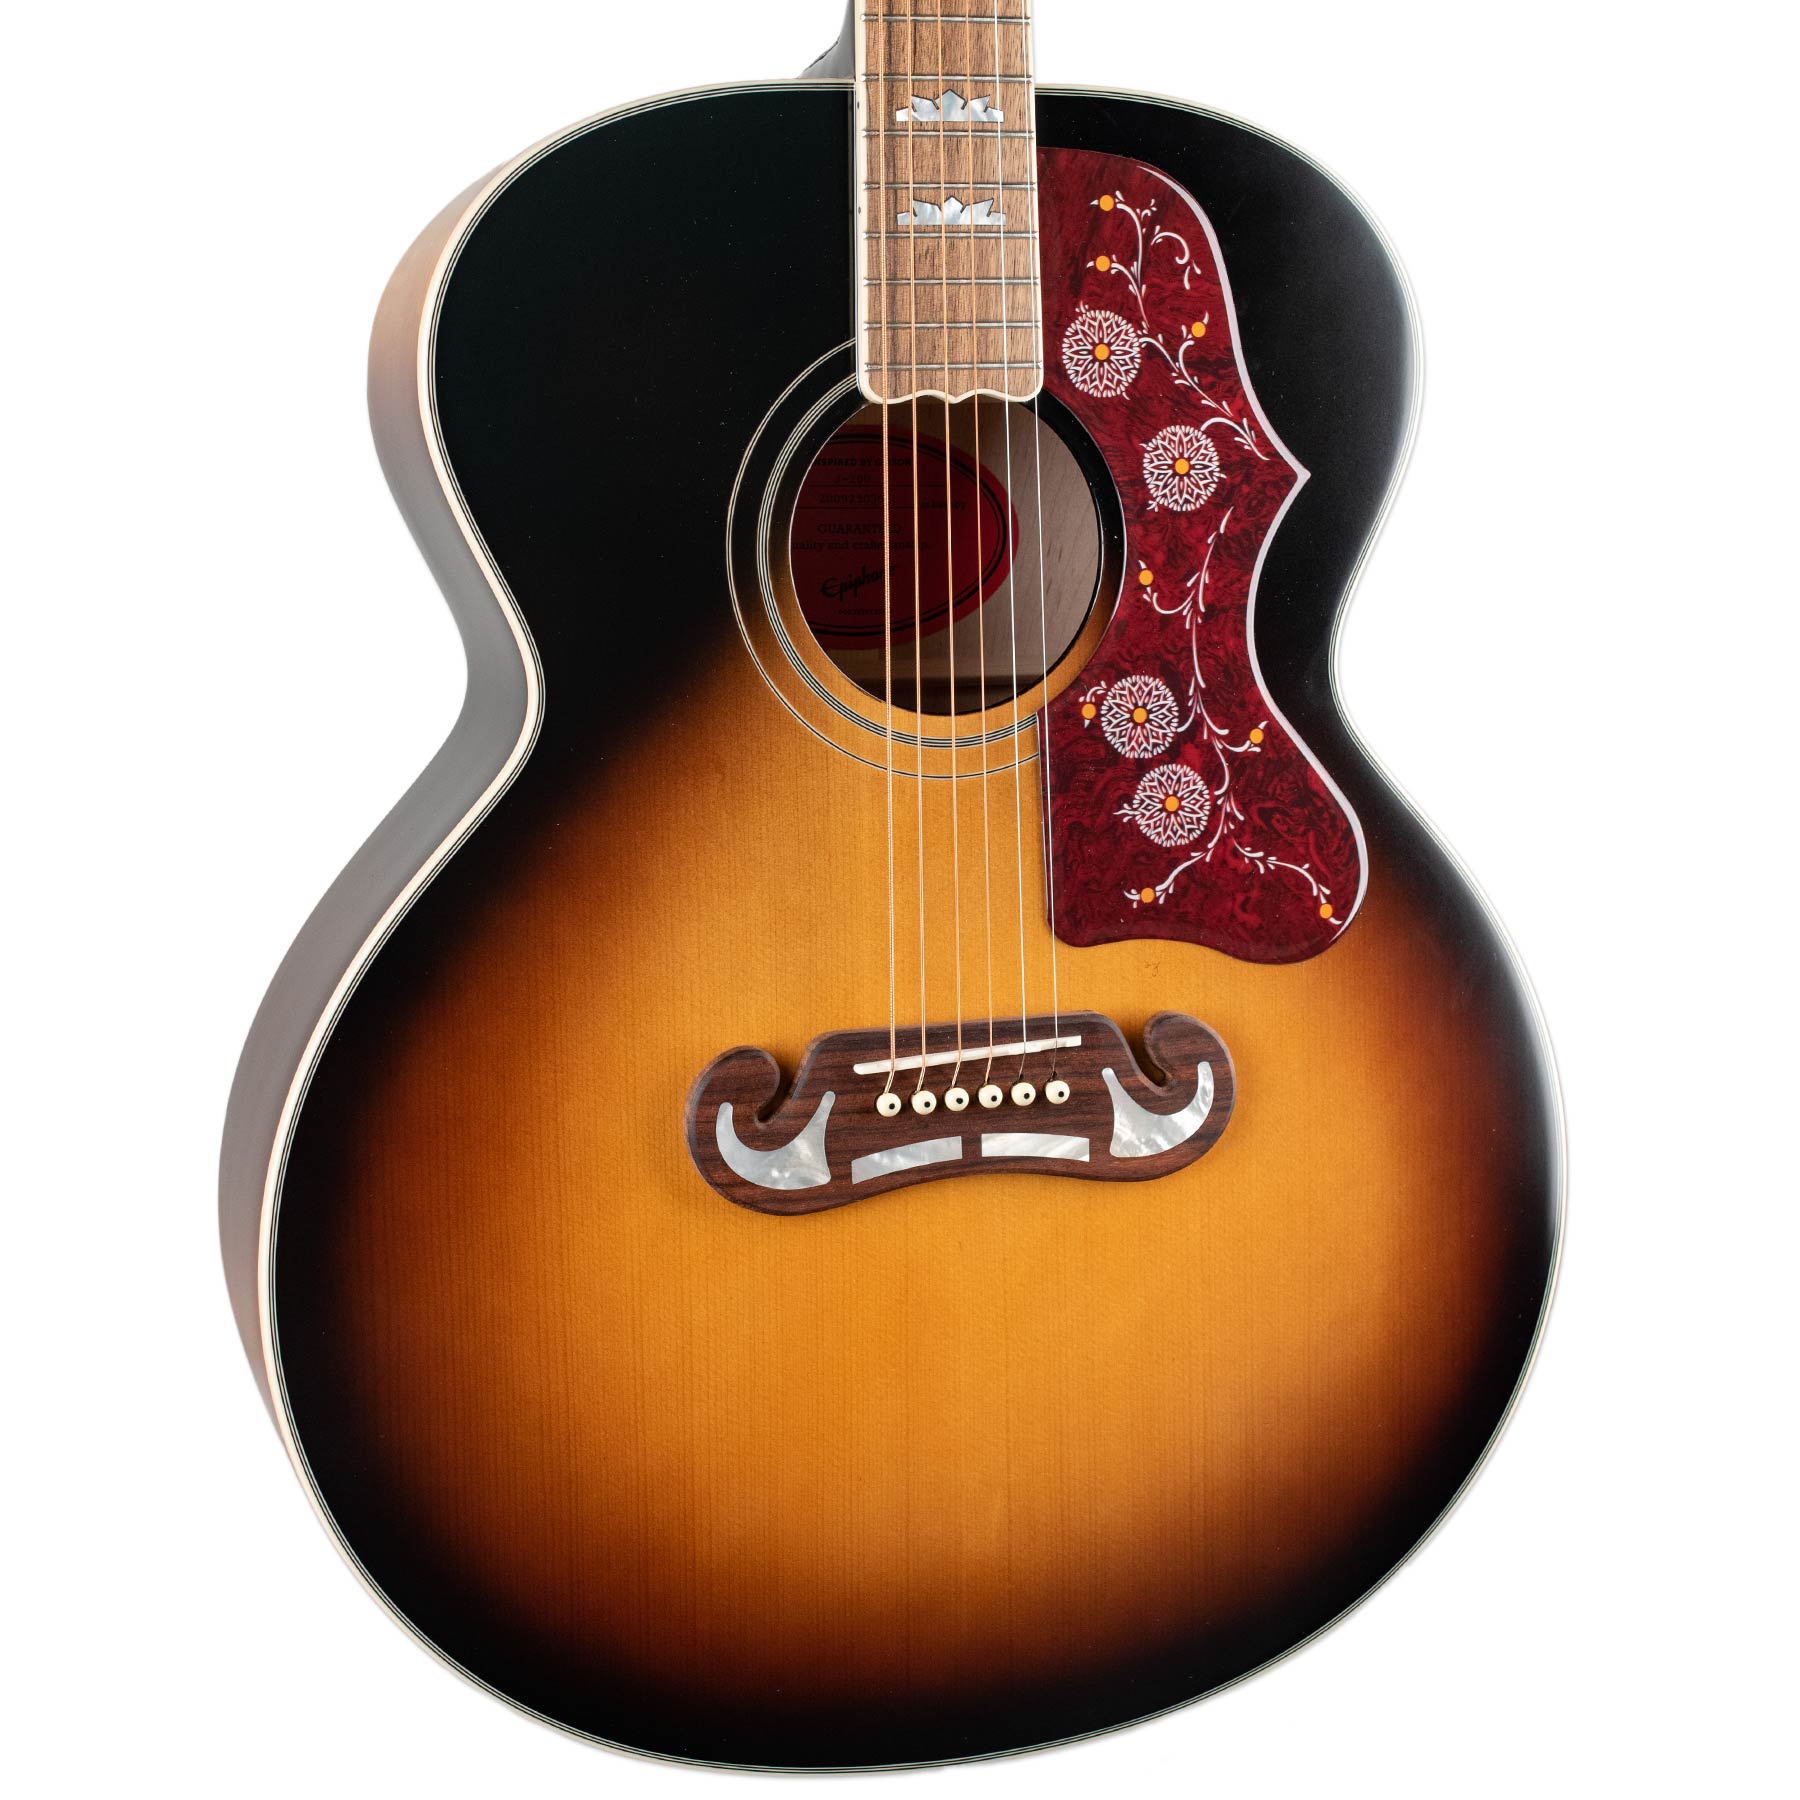 EPIPHONE INSPIRED BY GIBSON MASTERBILT J-200 -AGED VINTAGE